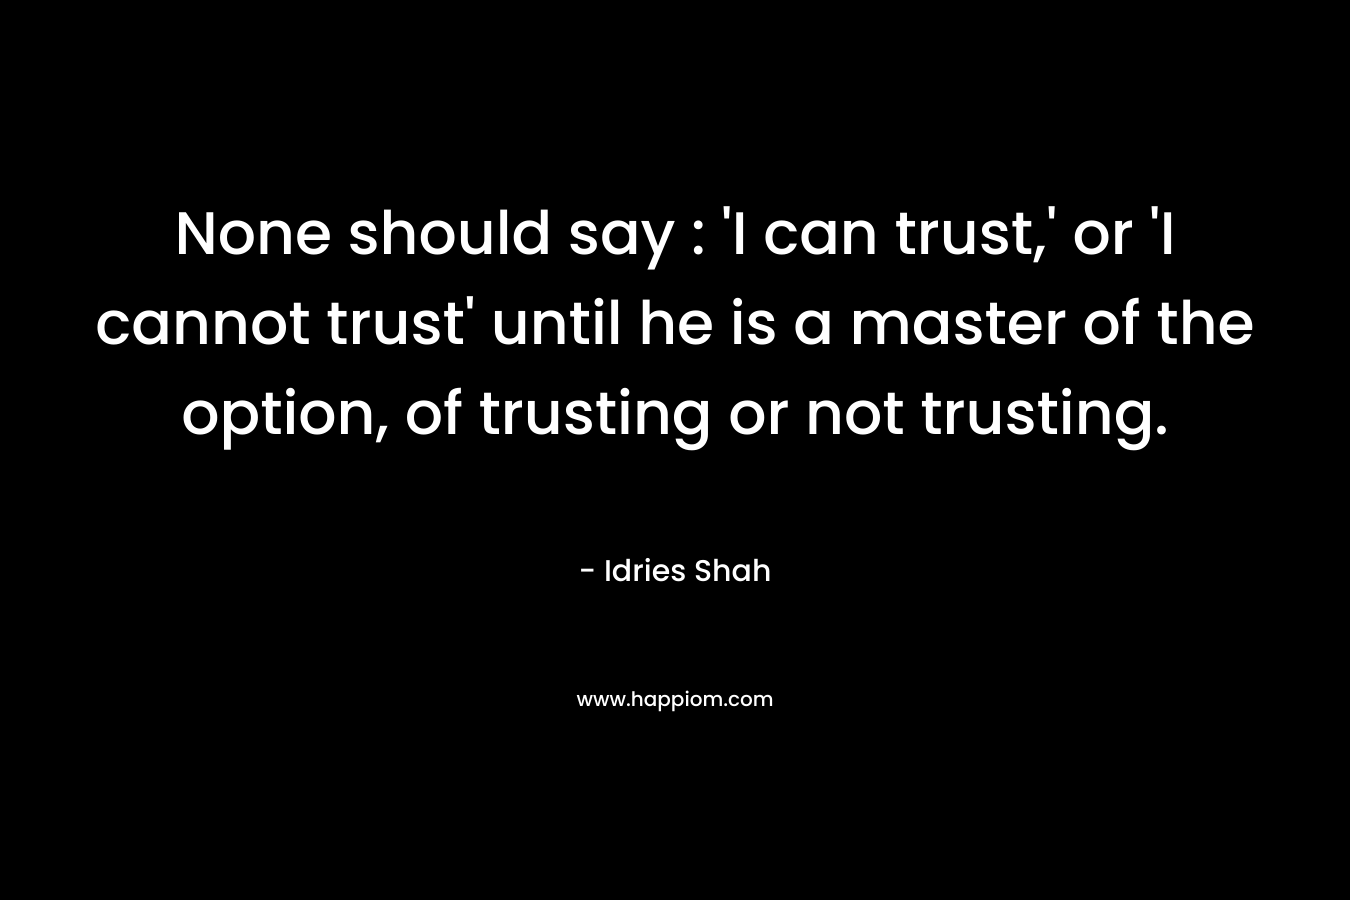 None should say : 'I can trust,' or 'I cannot trust' until he is a master of the option, of trusting or not trusting.